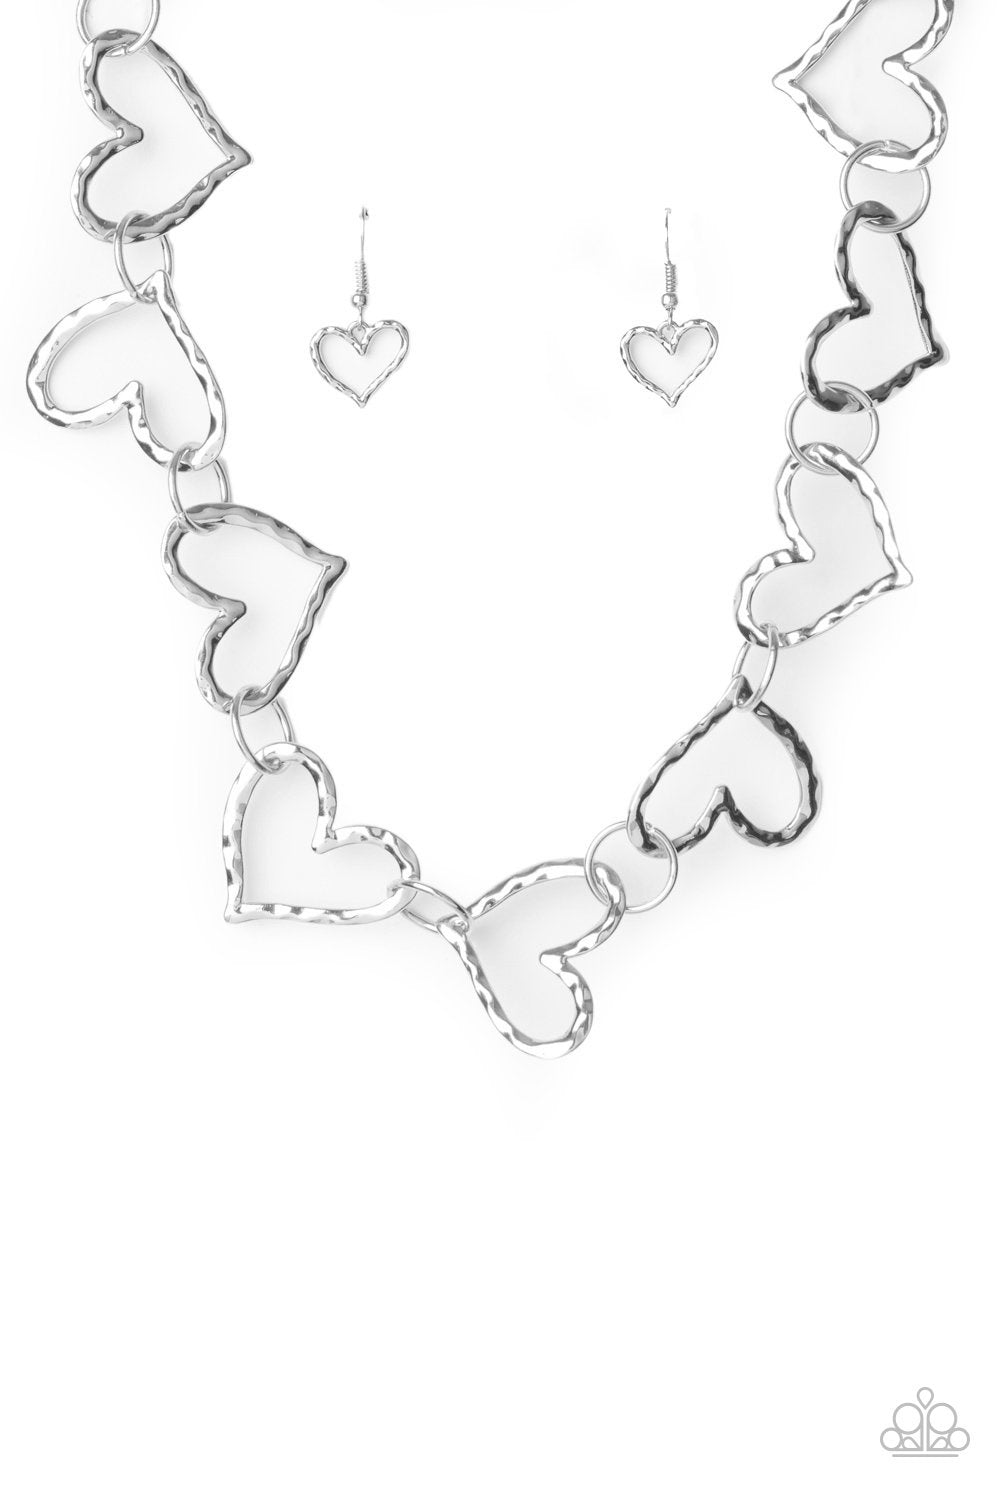 Vintagely Valentine Silver Heart Necklace - Paparazzi Accessories - lightbox -CarasShop.com - $5 Jewelry by Cara Jewels